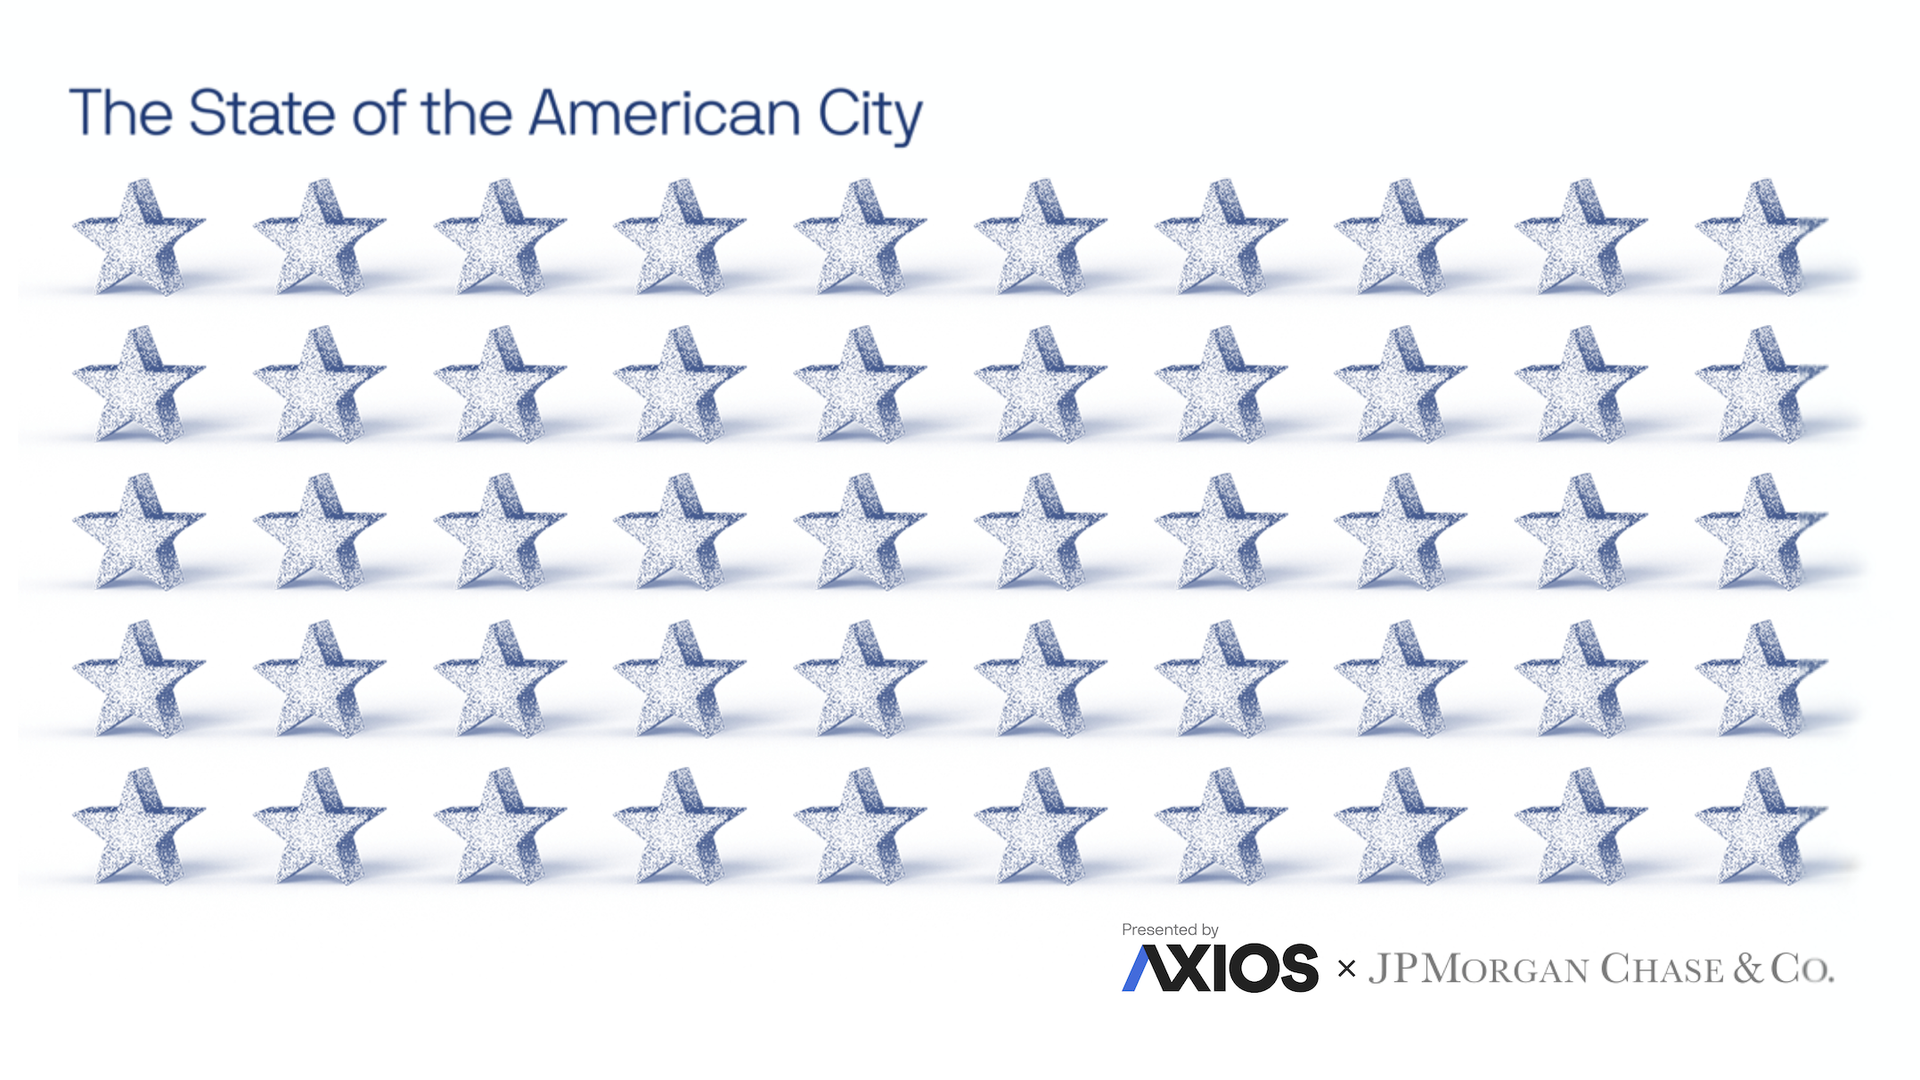 State of the American City with stars illustration